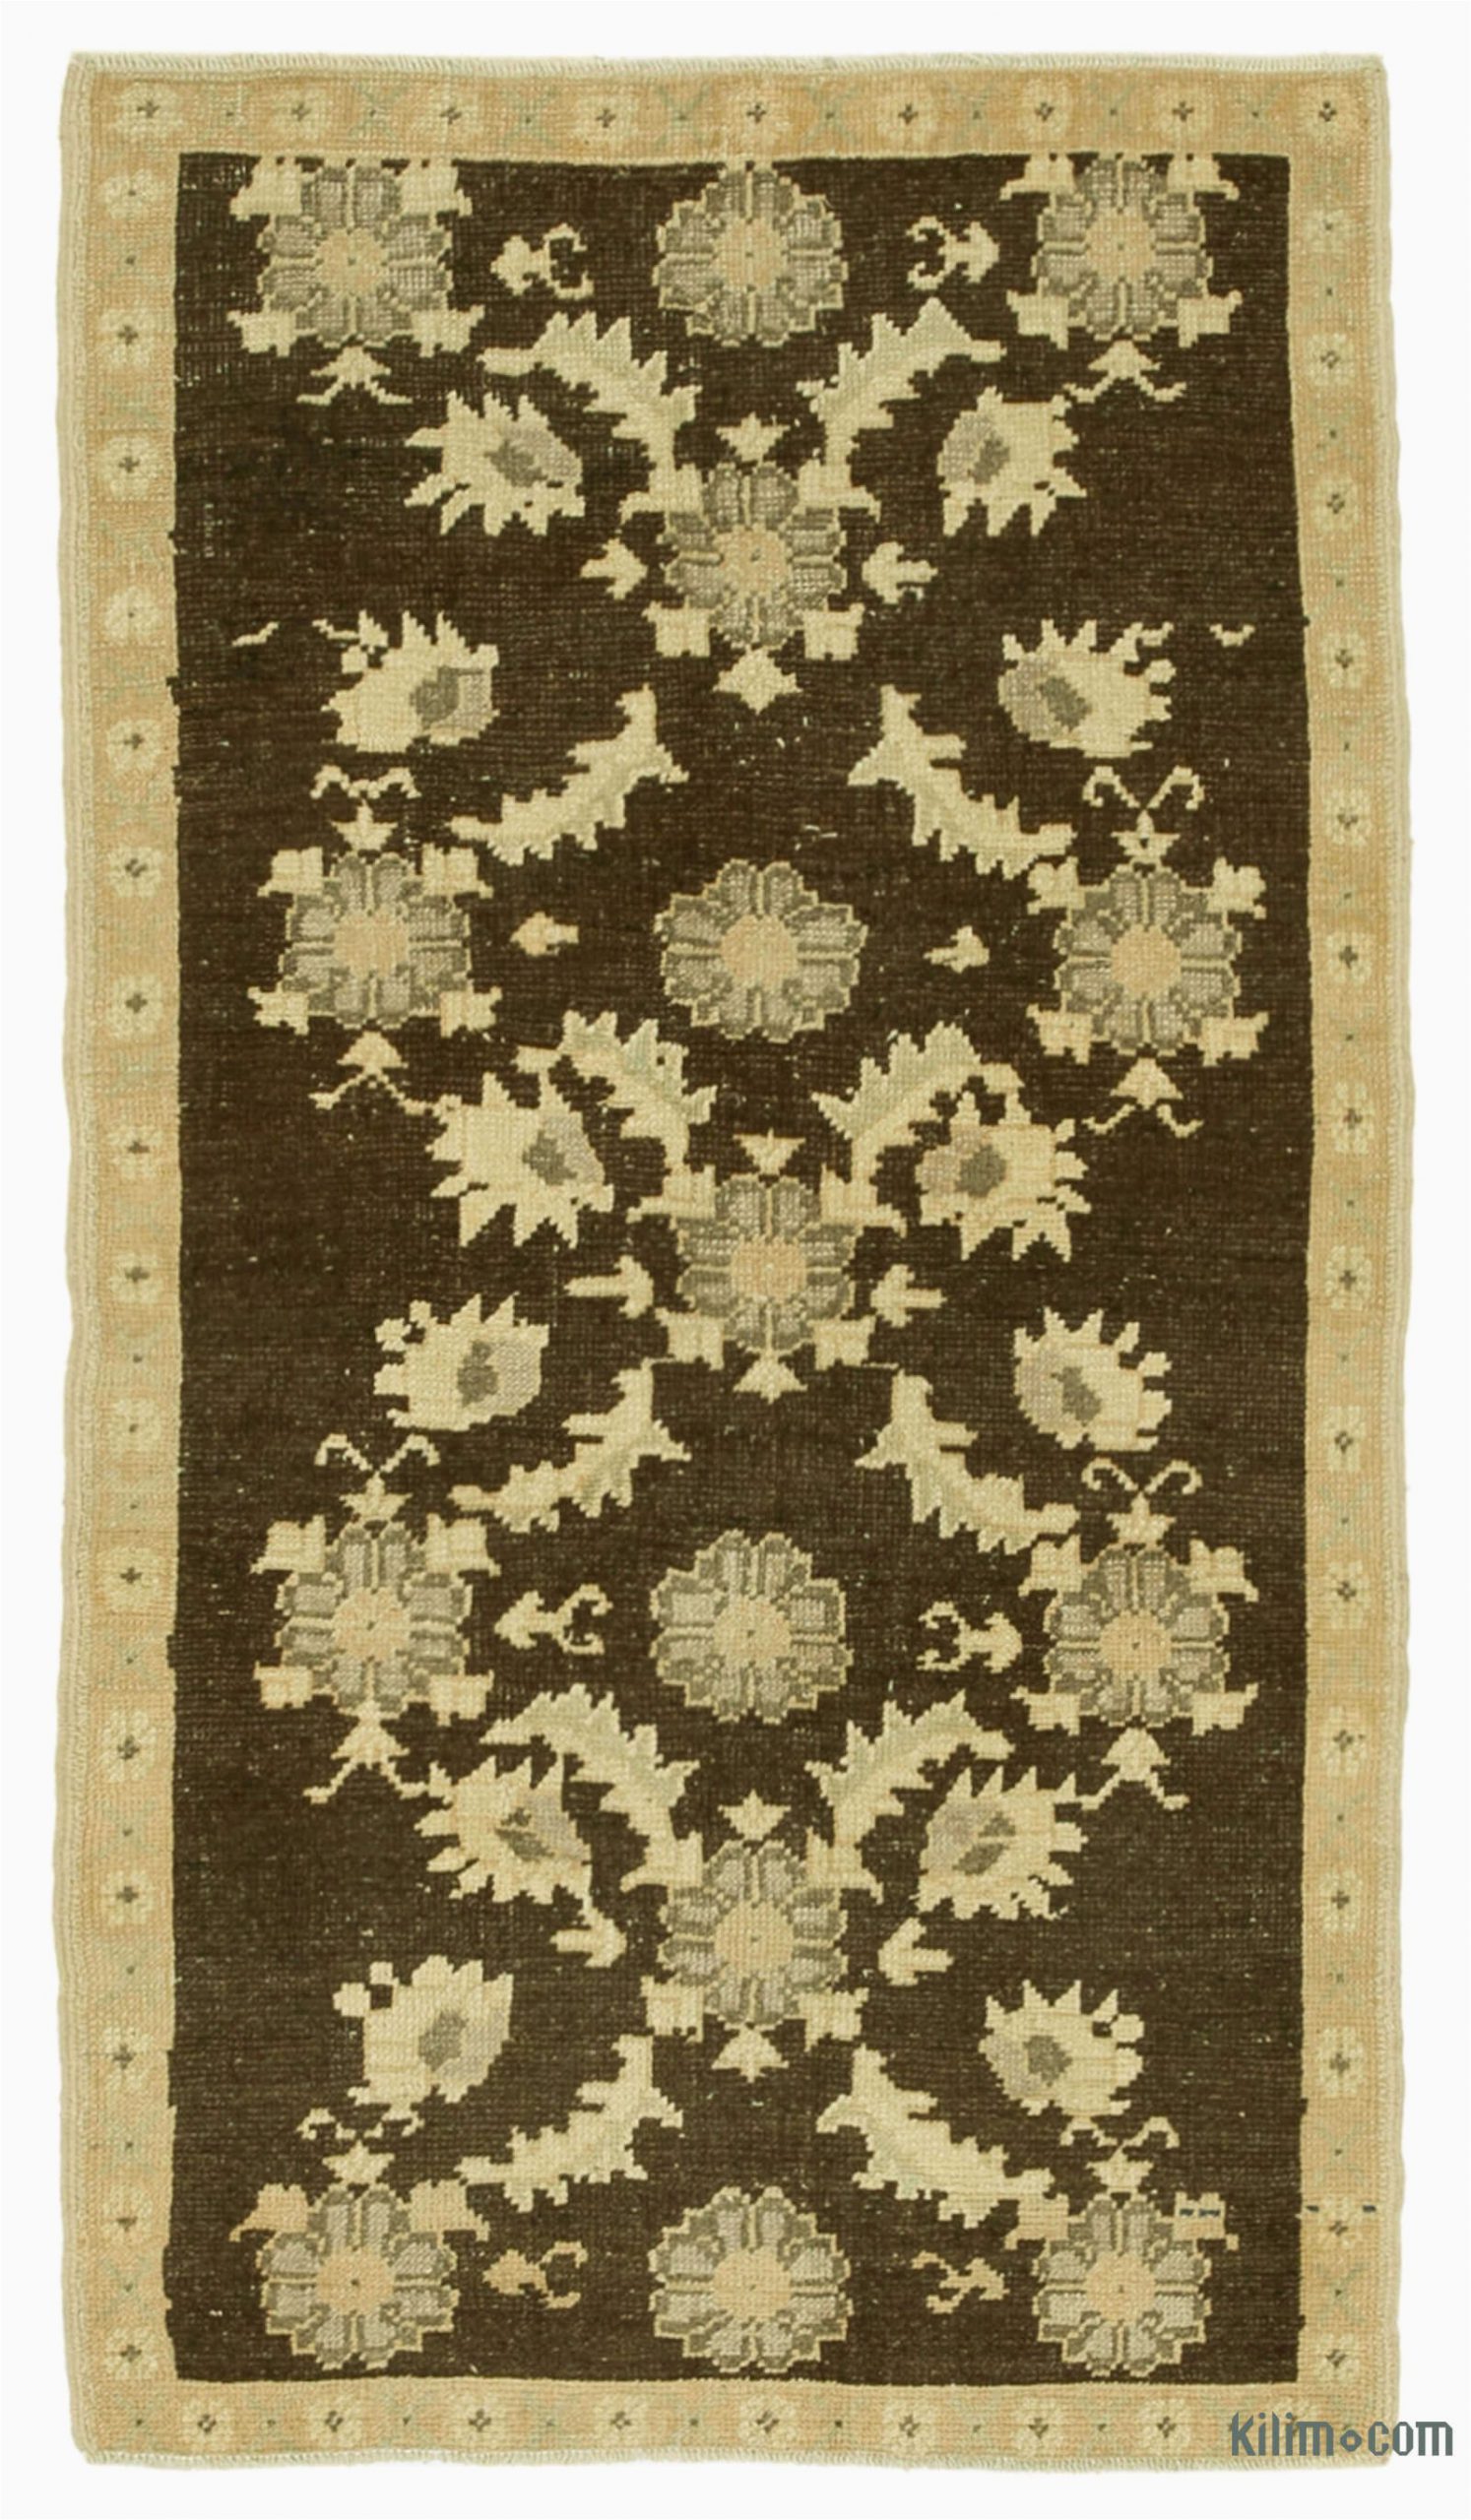 5 by 5 area Rugs Beige Brown All Wool Hand Knotted Vintage area Rug 3 X 5 5" 36 In X 65 In